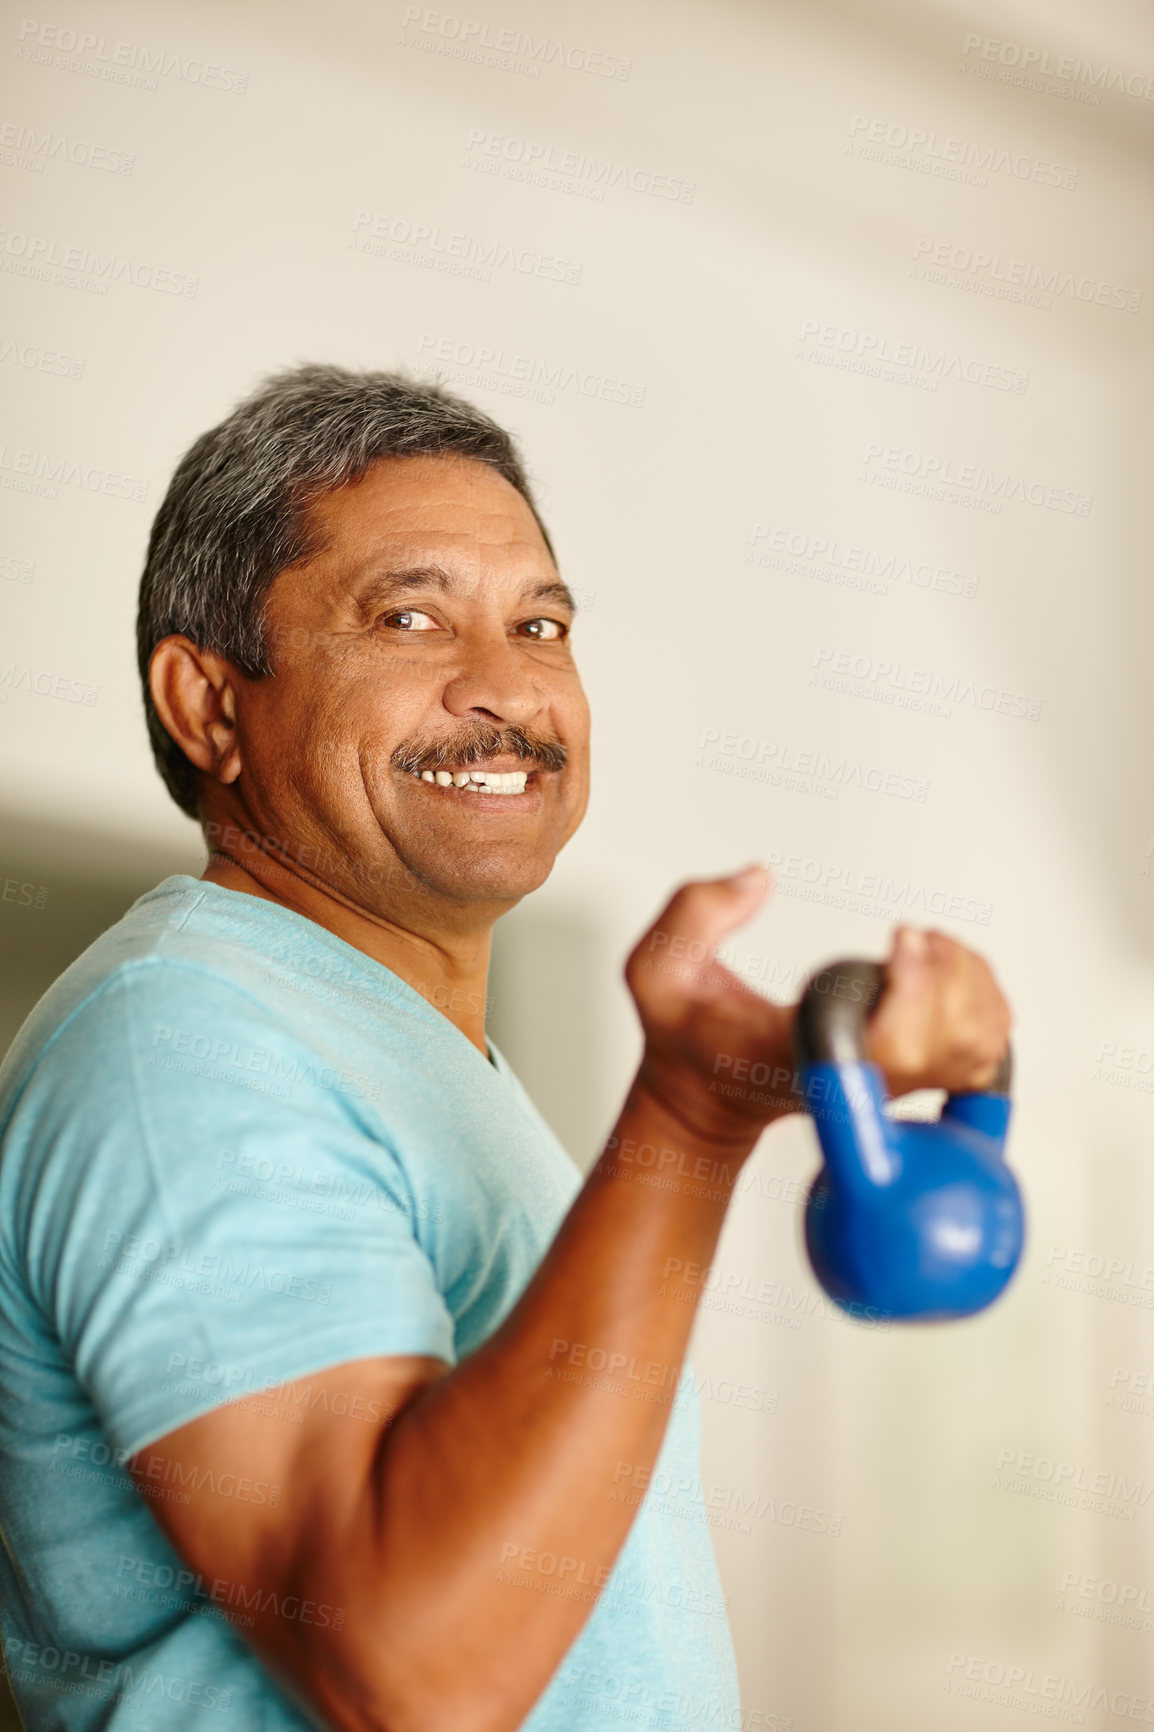 Buy stock photo Cropped shot of a mature man lifting dumbbells